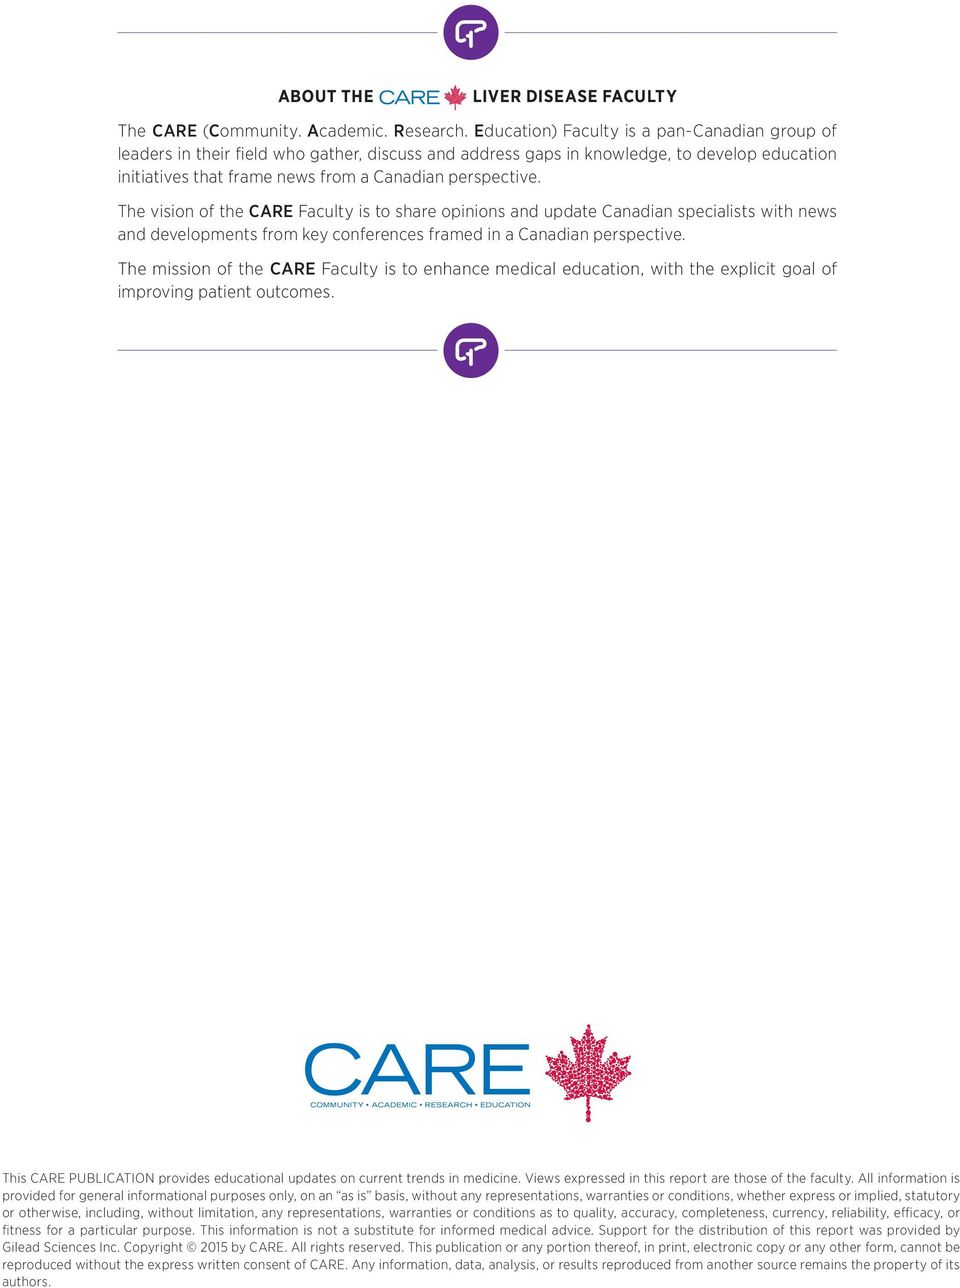 The vision of the CARE Faculty is to share opinions and update Canadian specialists with news and developments from key conferences framed in a Canadian perspective.